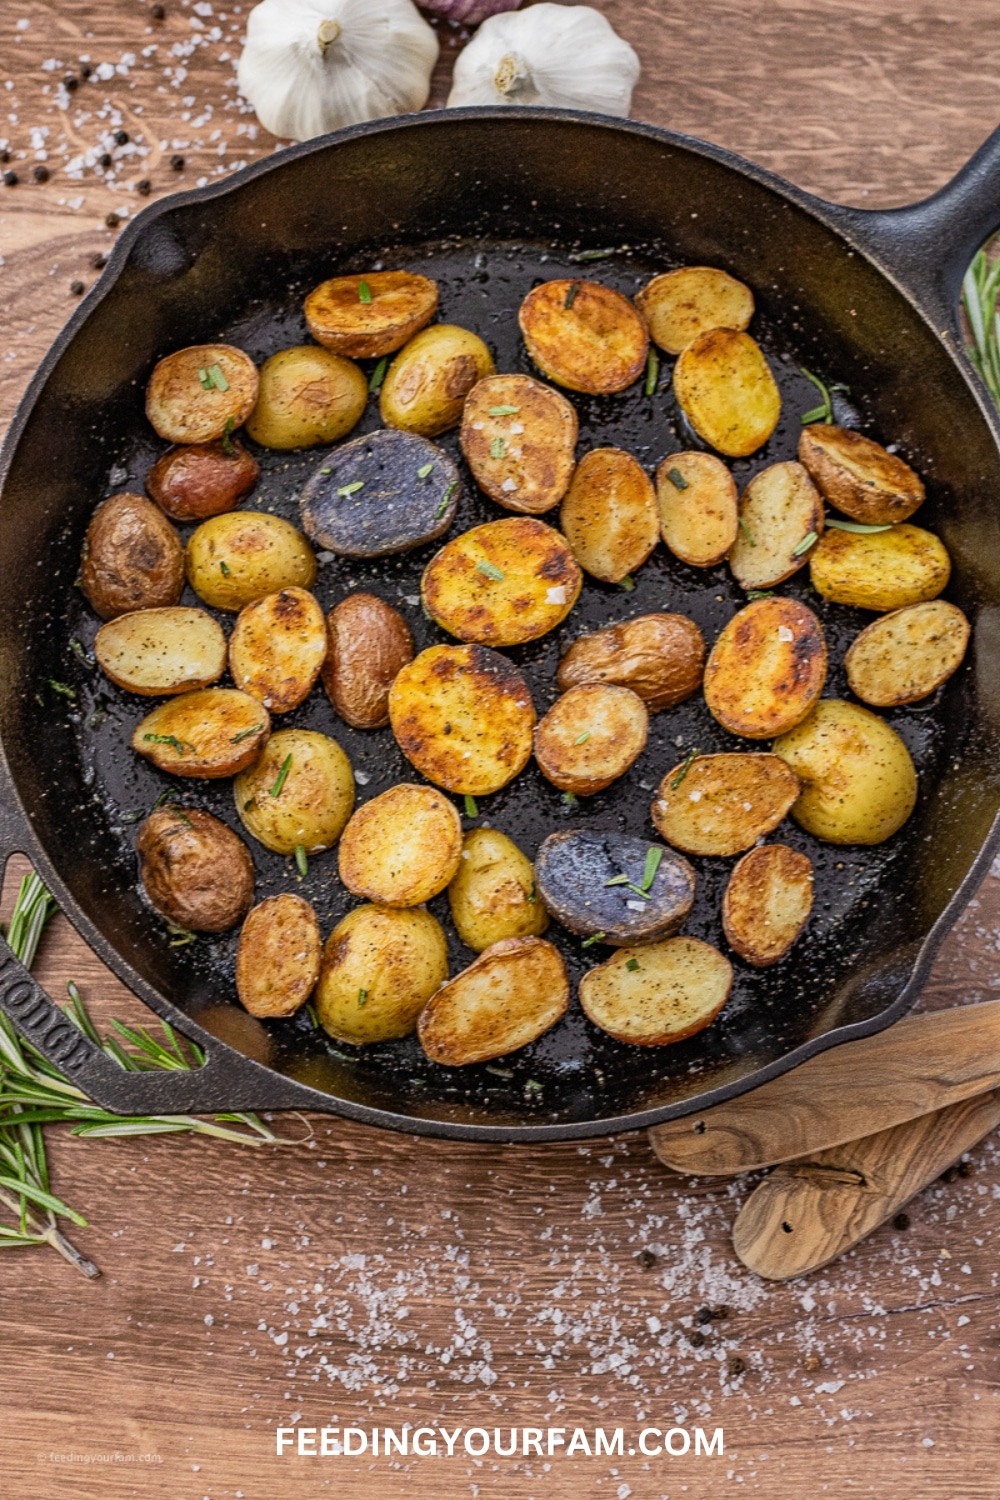 Learn how to make crisp and delicious Cast Iron Skillet Potatoes. Baby potatoes are cooked right on the stovetop in a cast iron skillet for perfectly crisp on the outside and fluffy inside potatoes.